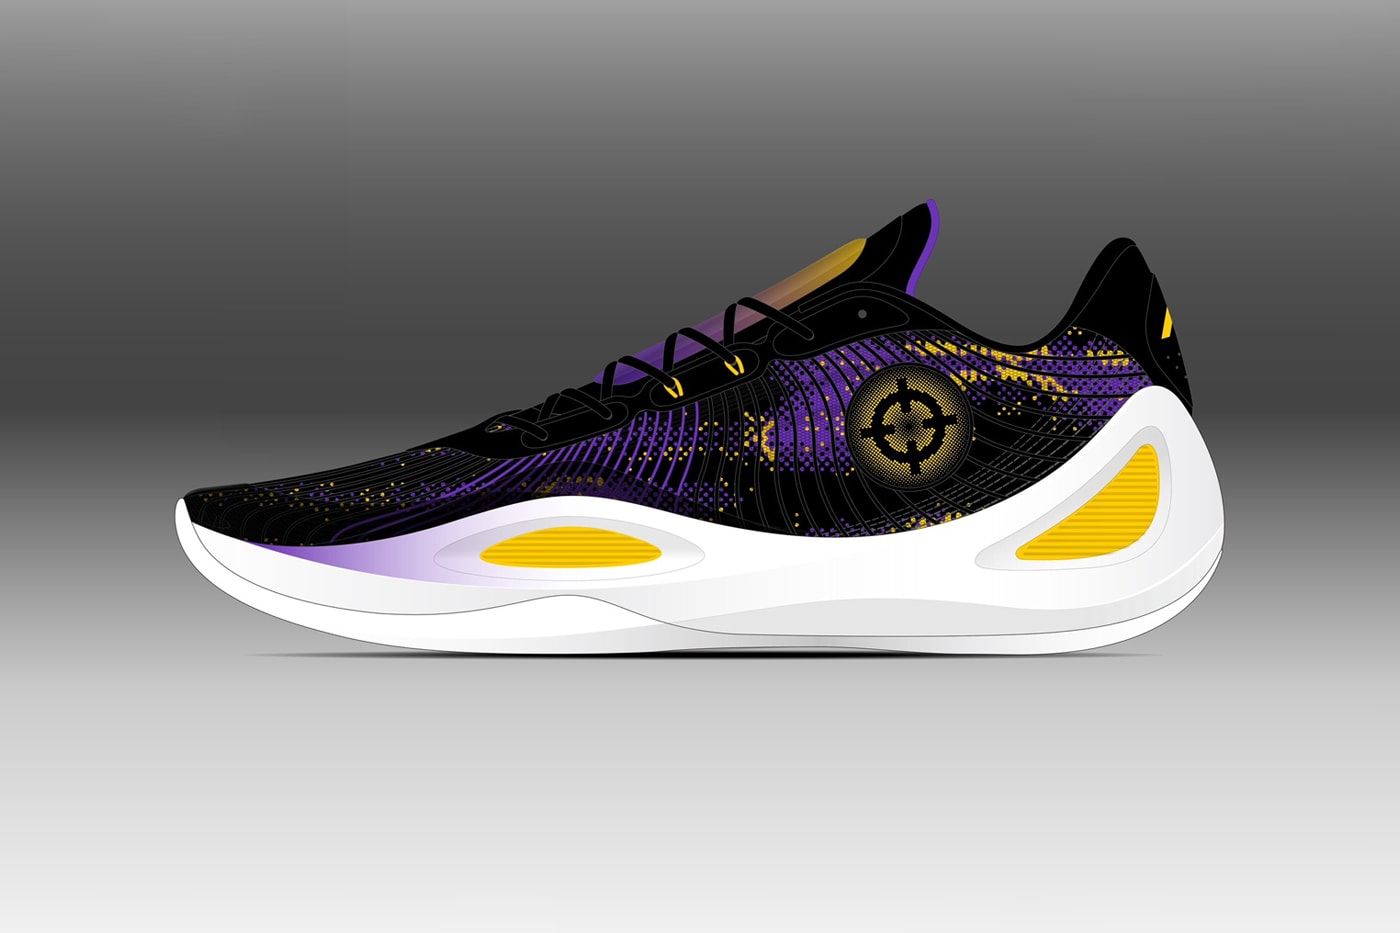 Lakers' Austin Reaves To Receive Own Signature Rigorer ar1 Shoe los angeles lakers nba basketball player lebron james summer 2023 release shooter basketball player